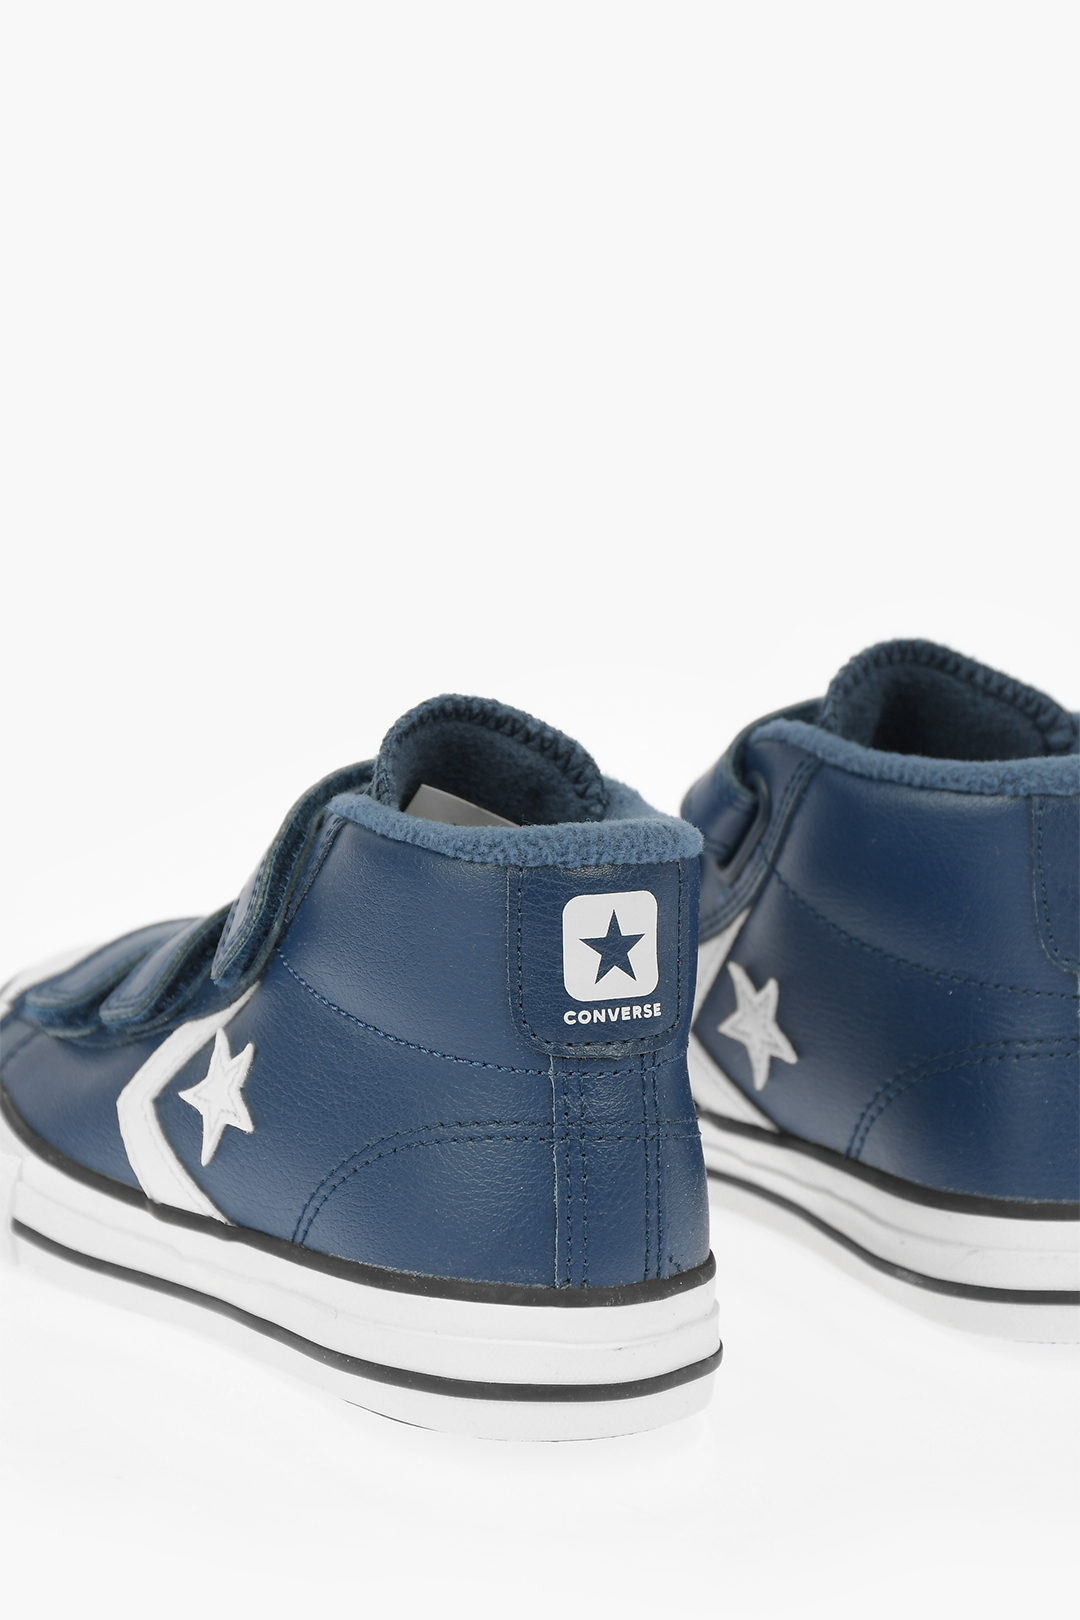 Converse Leather PLAYER unisex boys girls - Glamood Outlet